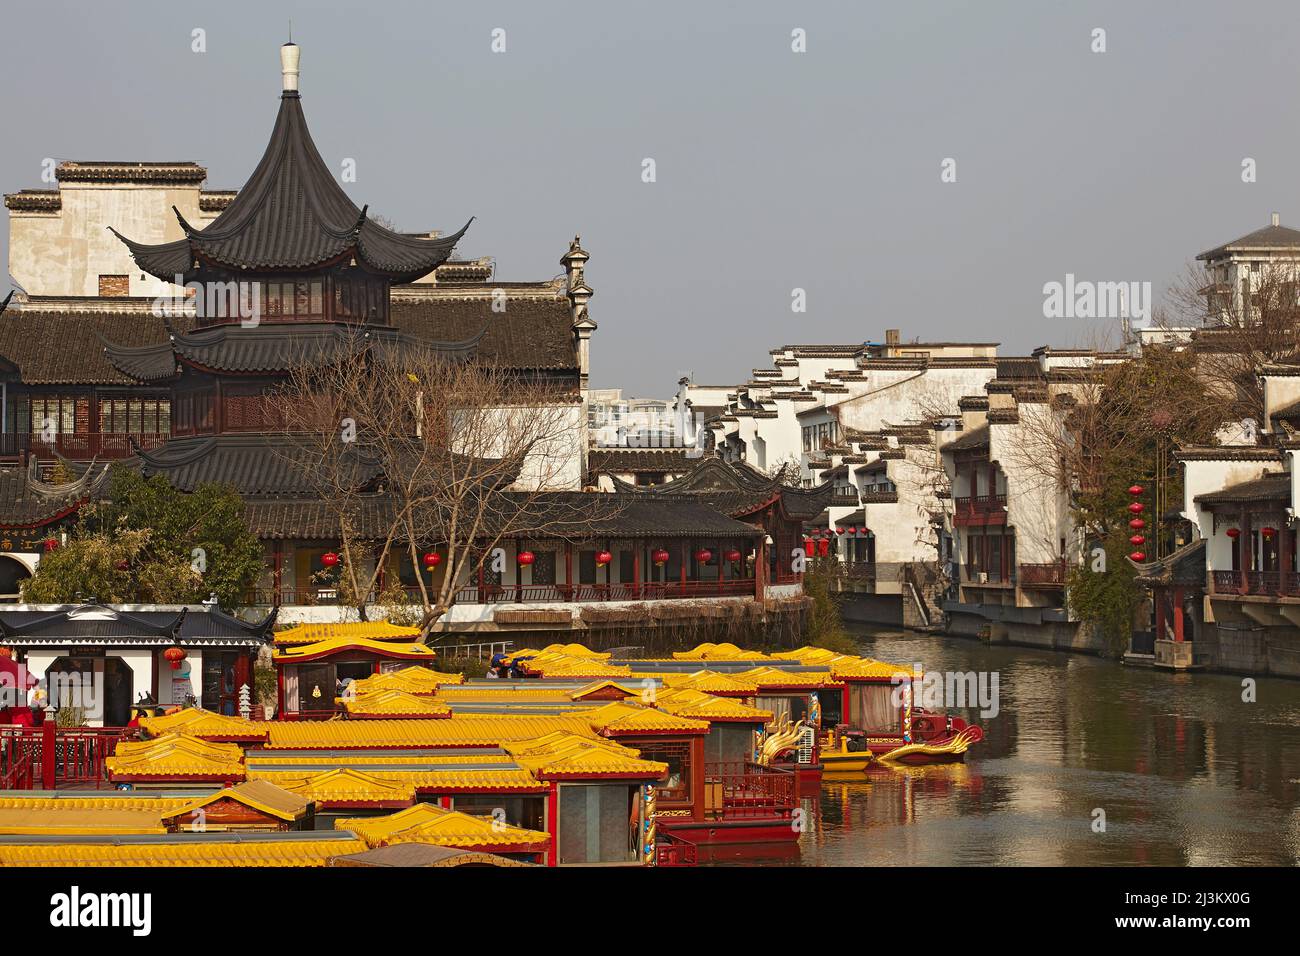 A scene outside Fuzimiao Temple and on the banks of the Qinhuai River, in the old part of central Nanjing, Jiangsu province, China. Stock Photo